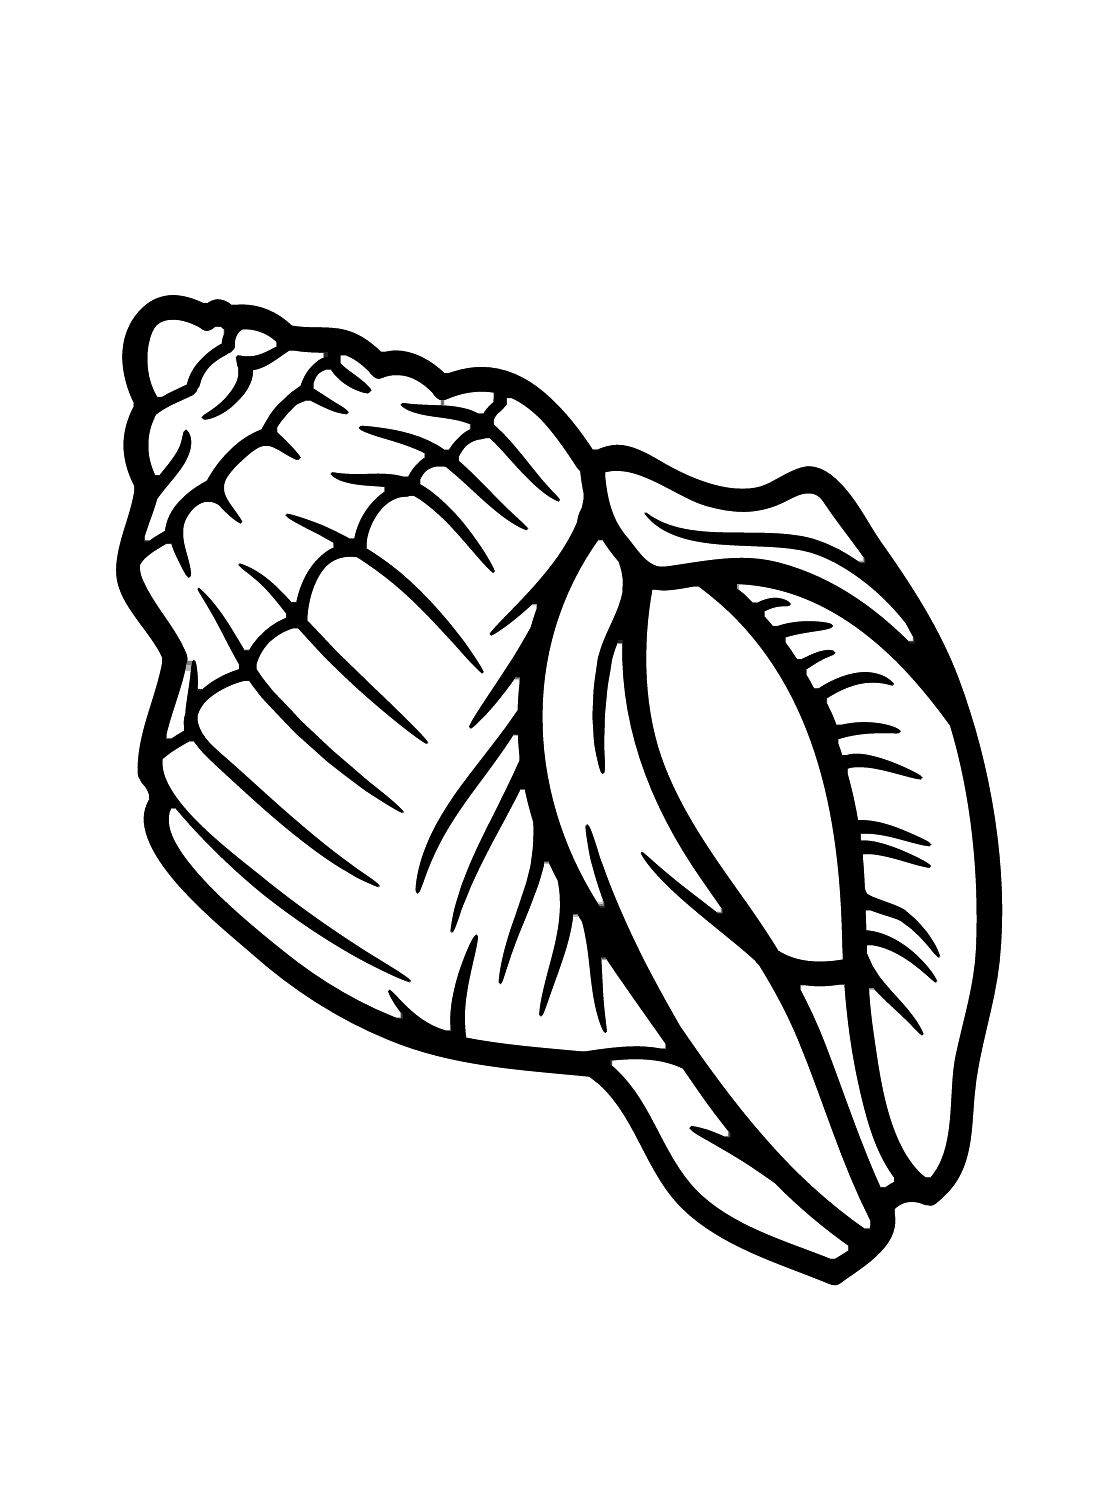 Conch color Sheets Coloring Page